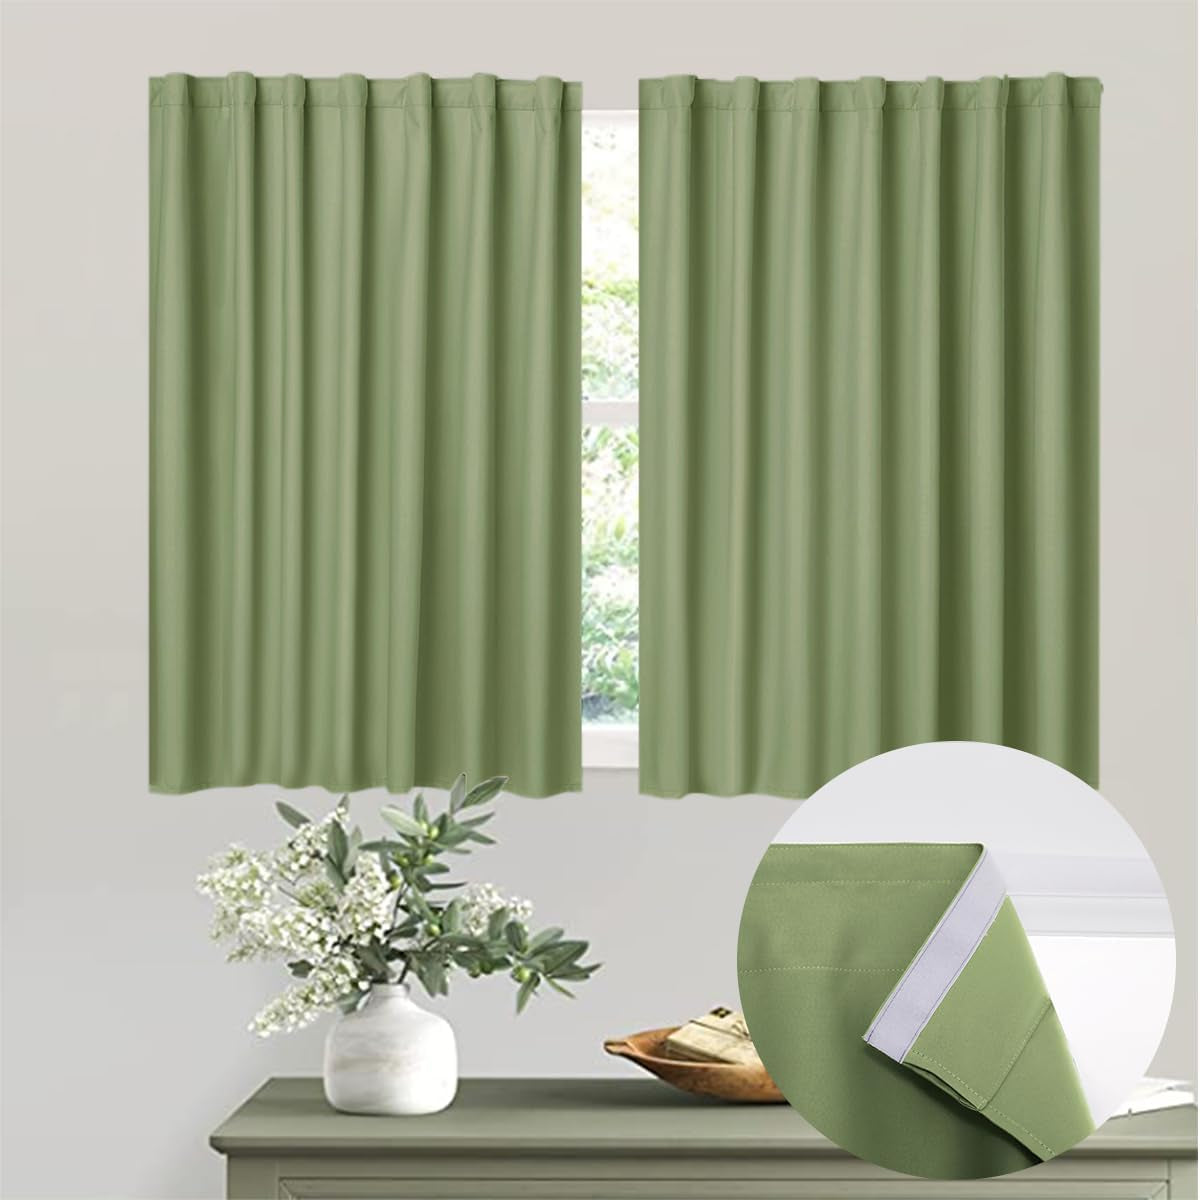 Muamar 2Pcs Blackout Curtains Privacy Curtains 63 Inch Length Window Curtains,Easy Install Thermal Insulated Window Shades,Stick Curtains No Rods, Black 42" W X 63" L  Muamar Sage Green 29"W X 36"L 